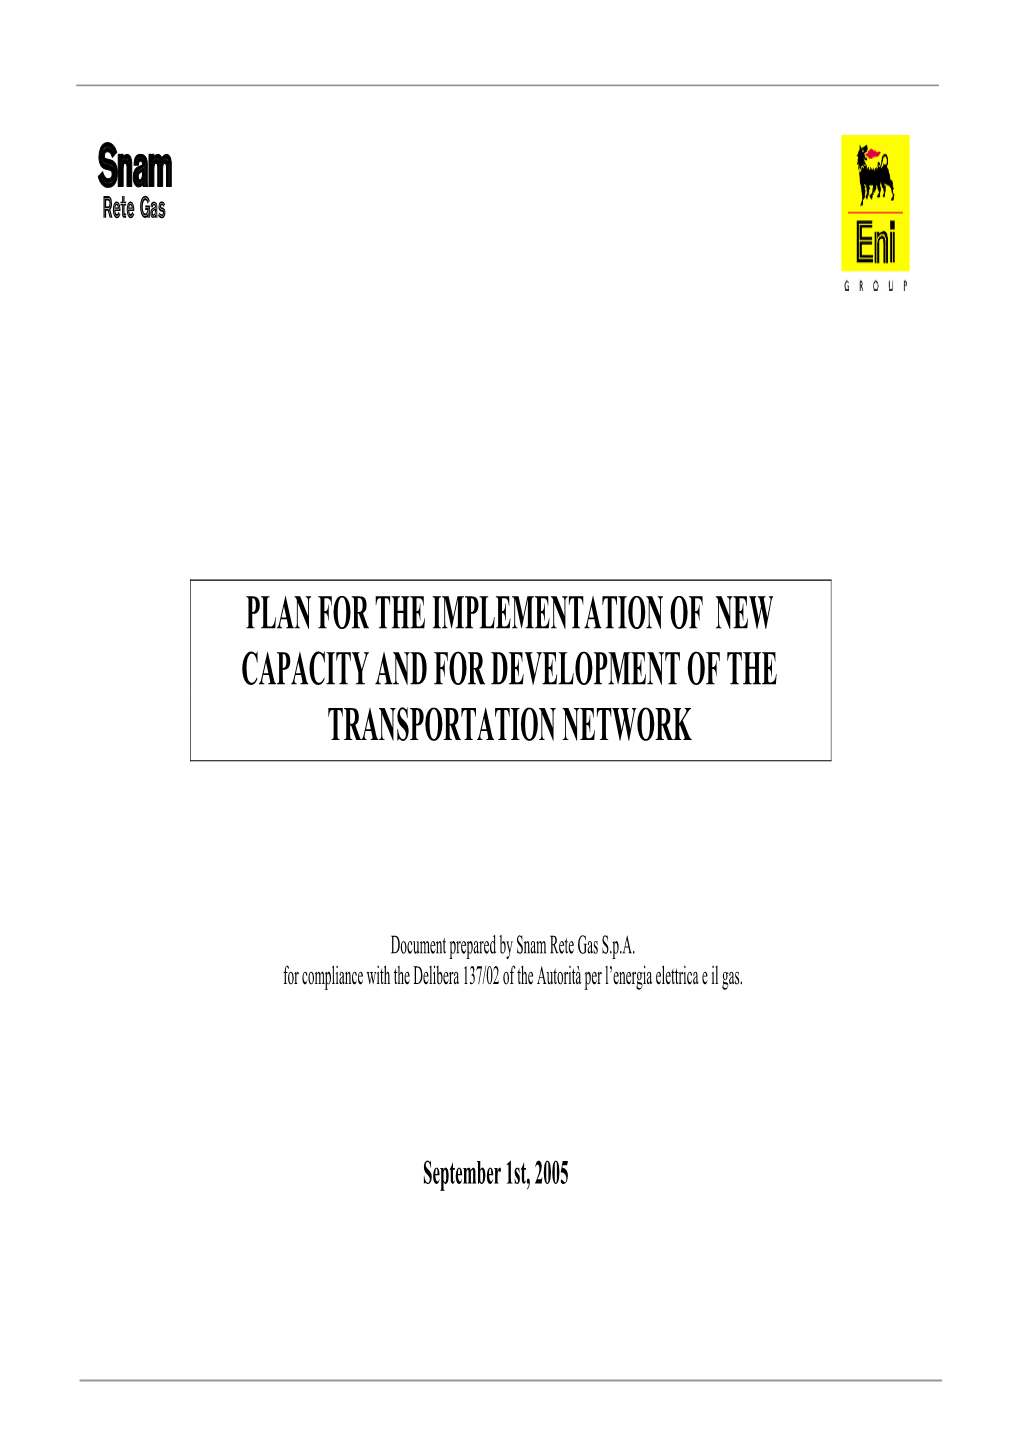 Plan for the Implementation of New Capacity and for Development of the Transportation Network